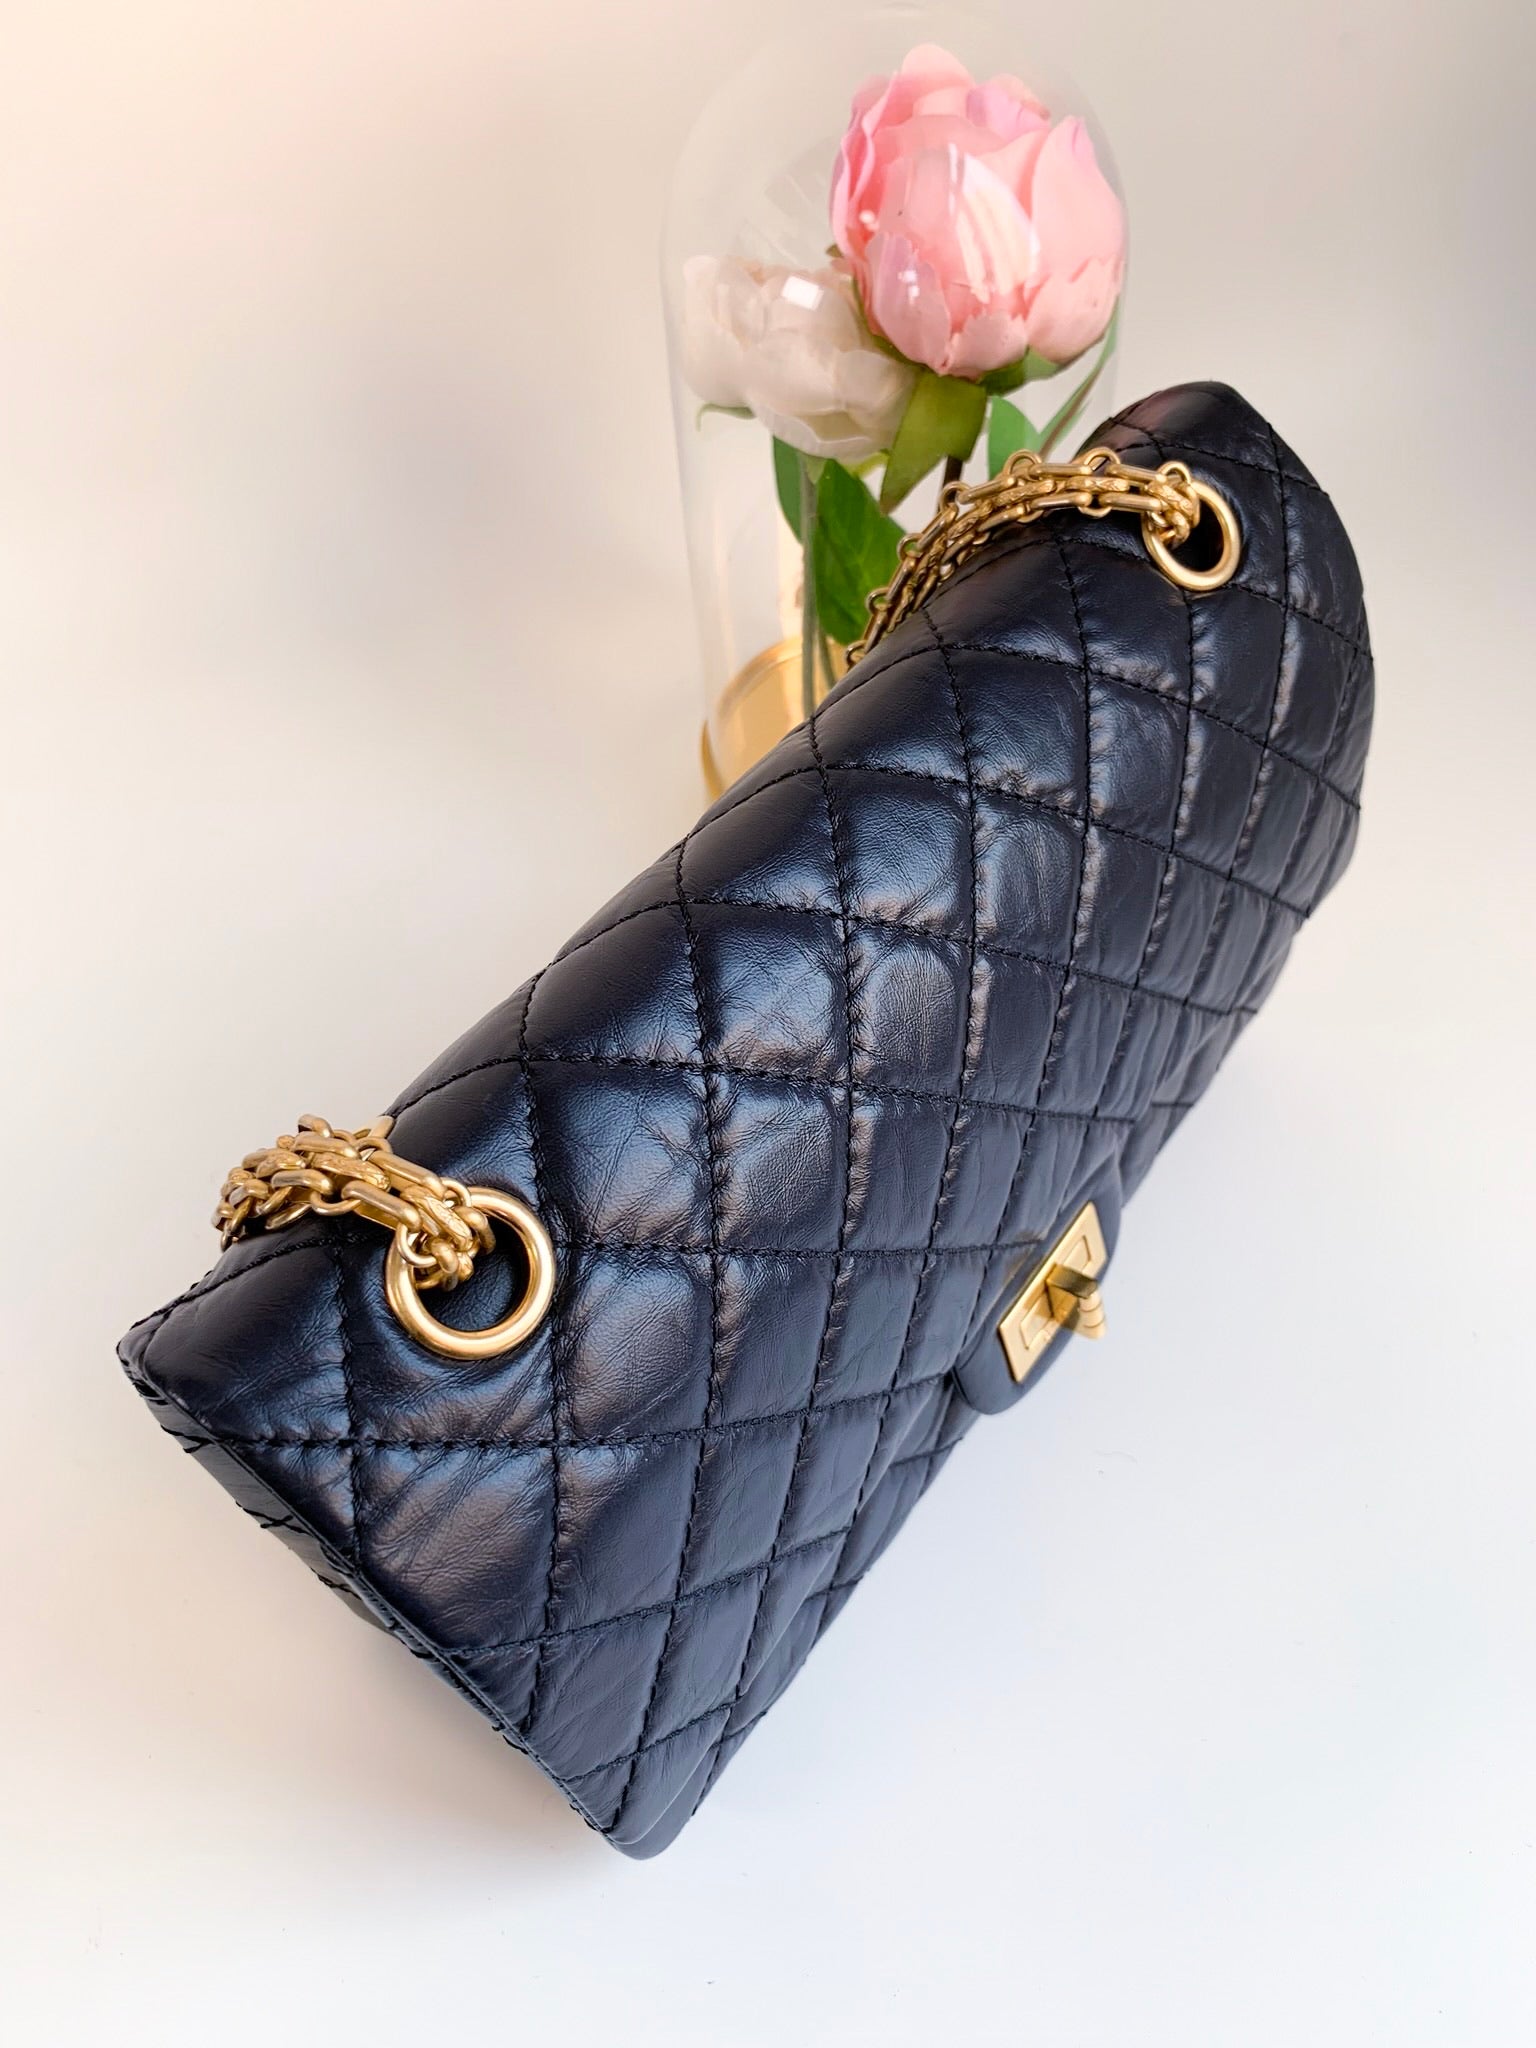 Chanel Aged Calfskin Quilted 2.55 Reissue 225 Flap Navy Gold Hardware –  Coco Approved Studio